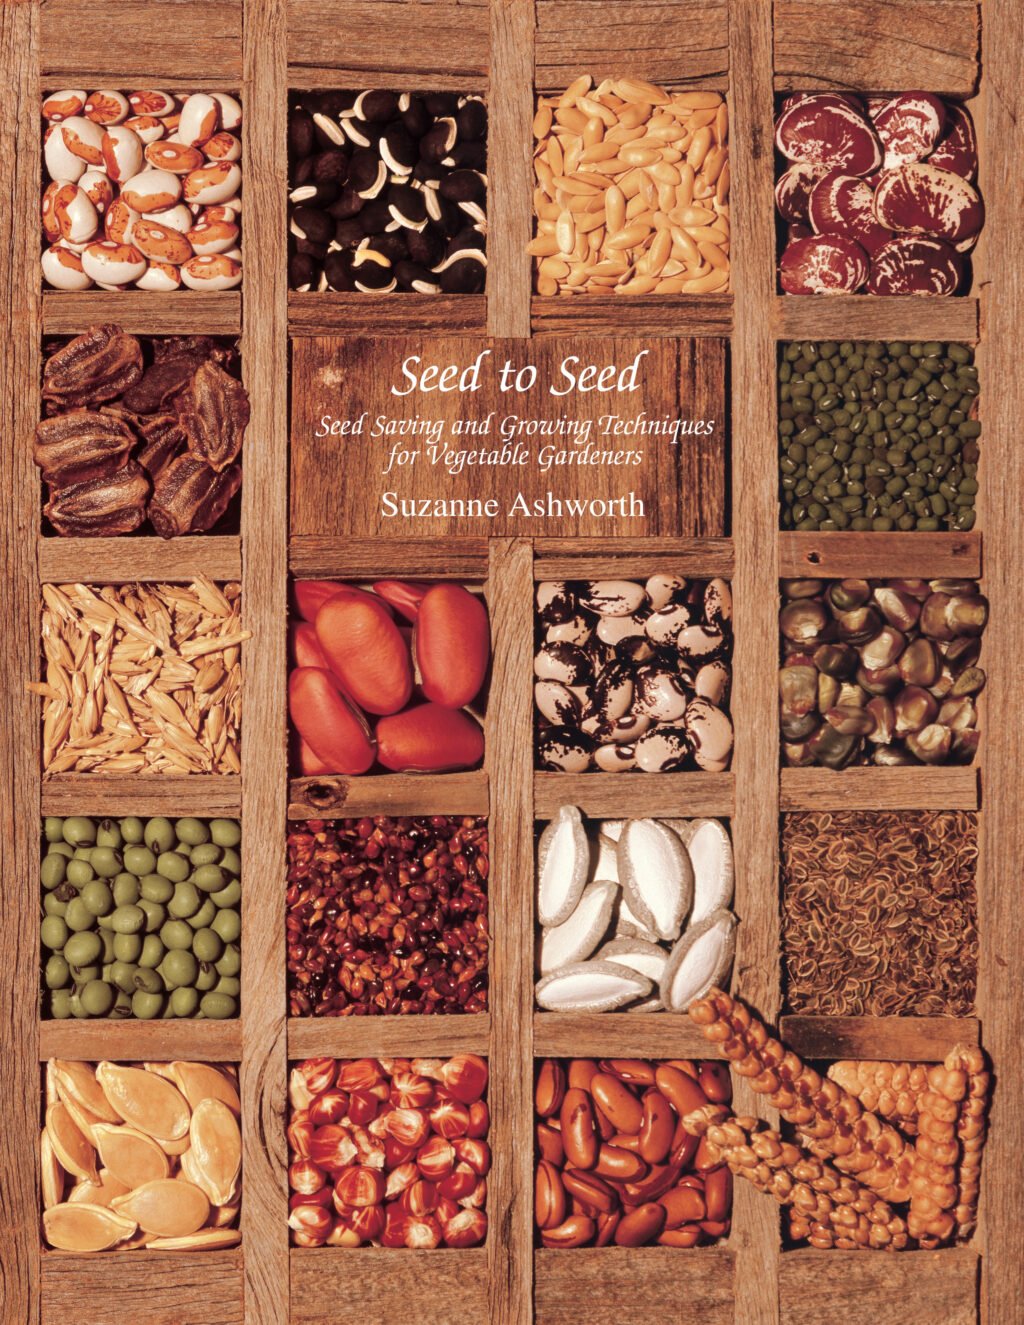 The Seed to Seed cover